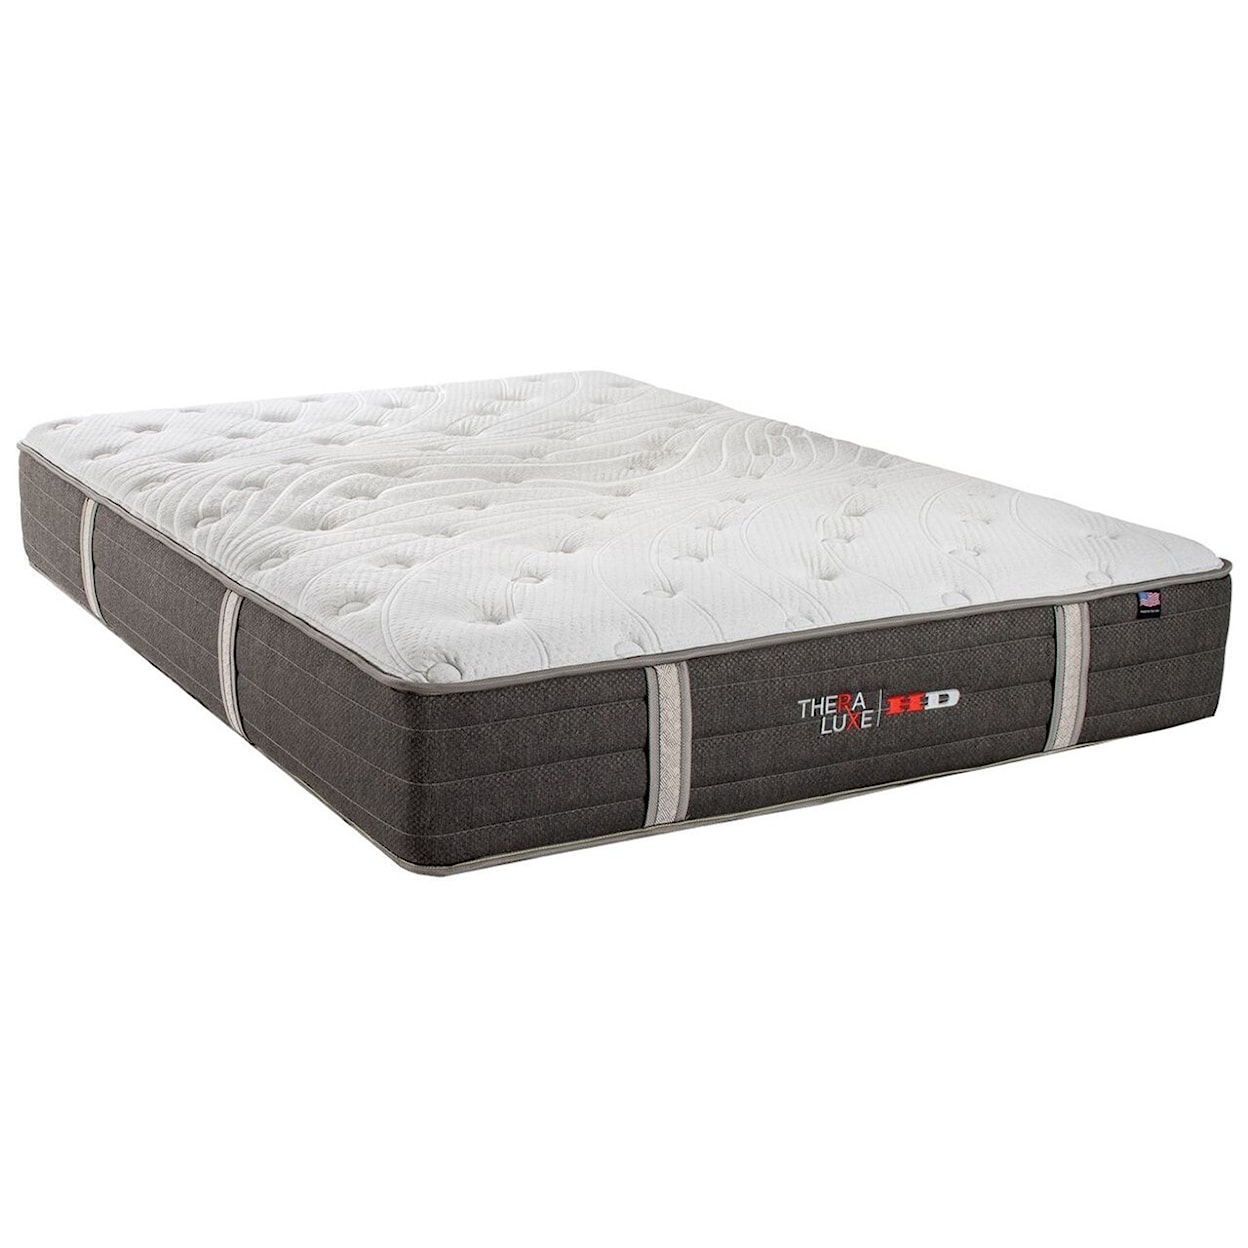 Therapedic Thera Luxe HD Balsam Twin XL Firm Pocketed Coil Mattress